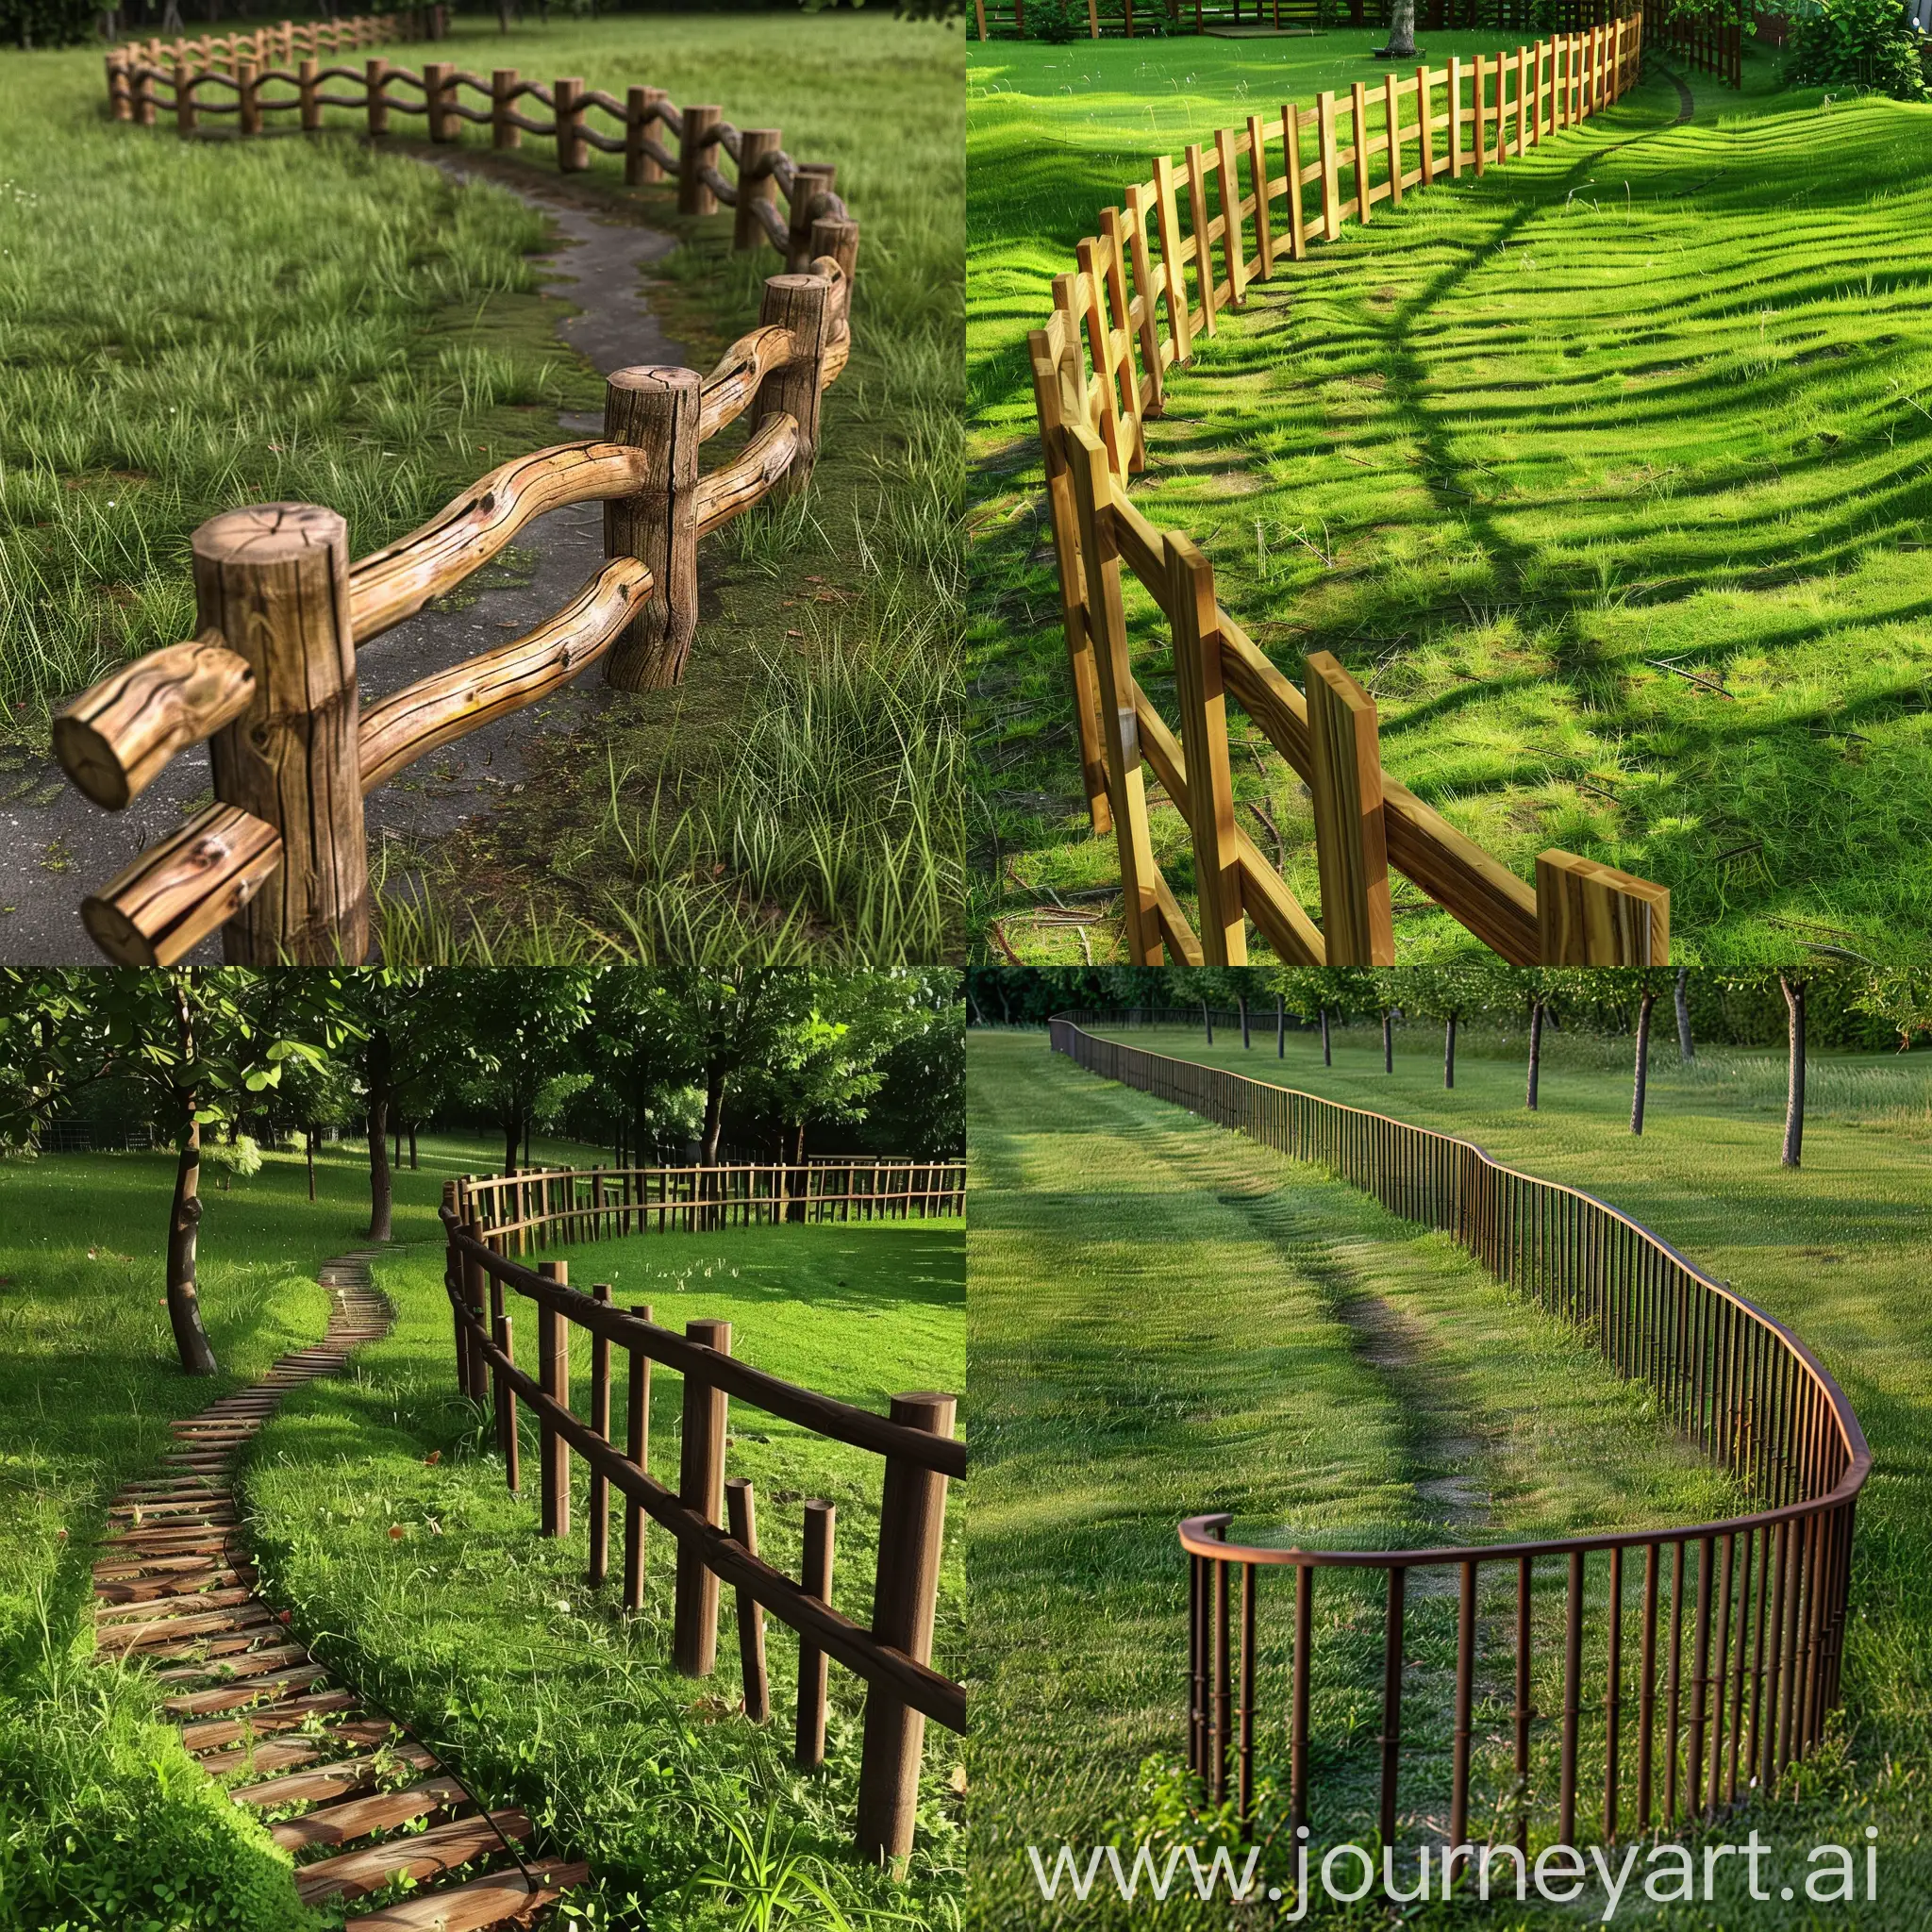 Realistic-Mixed-Reality-Scene-Bezier-Trajectory-Curve-Fence-on-Lawn